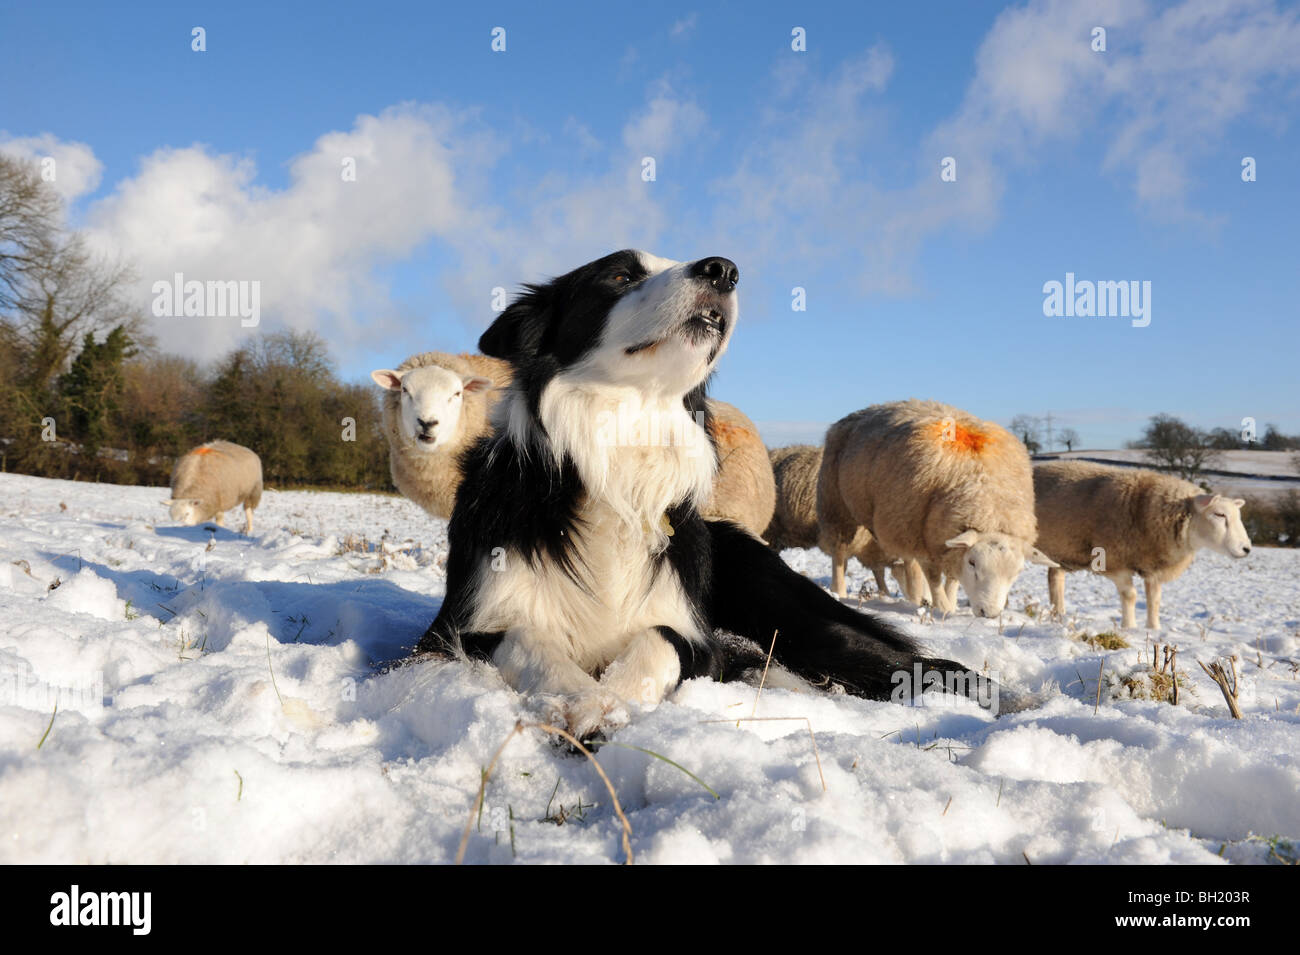 Border Collie sheep dog and Sheep in the snow Stock Photo